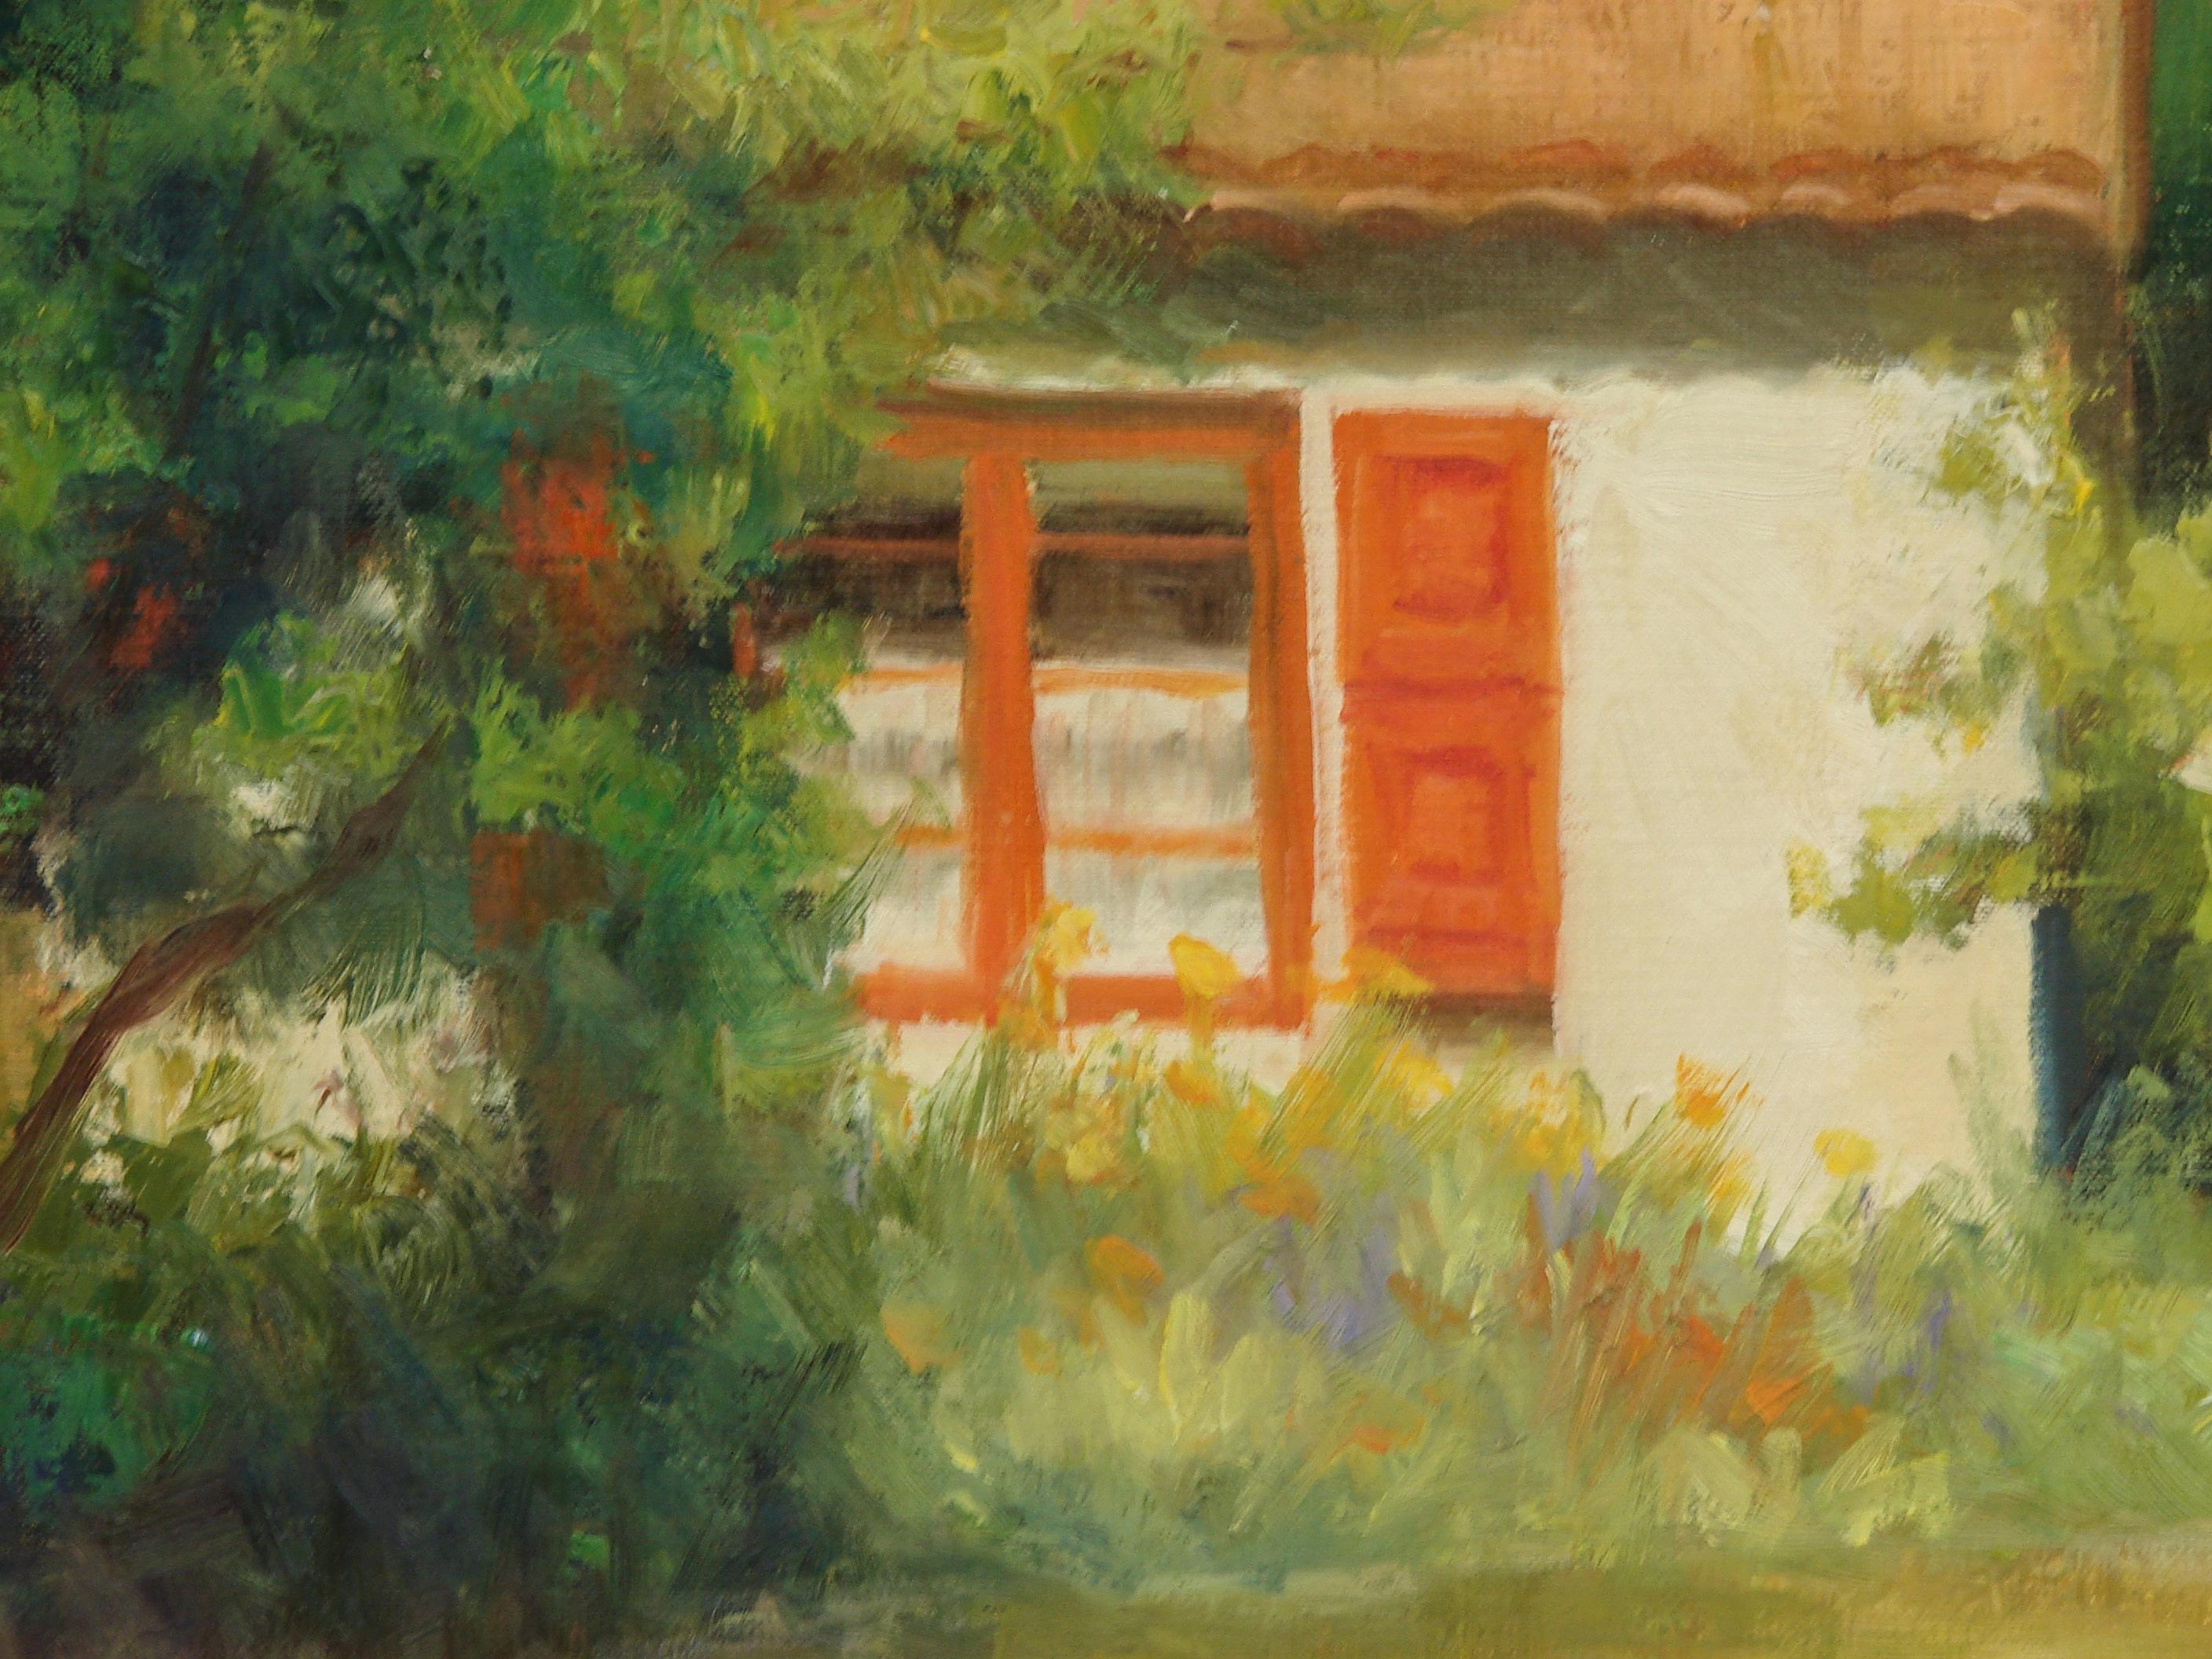 San Diego Cottage, Oil Painting - Brown Landscape Painting by Sherri Aldawood